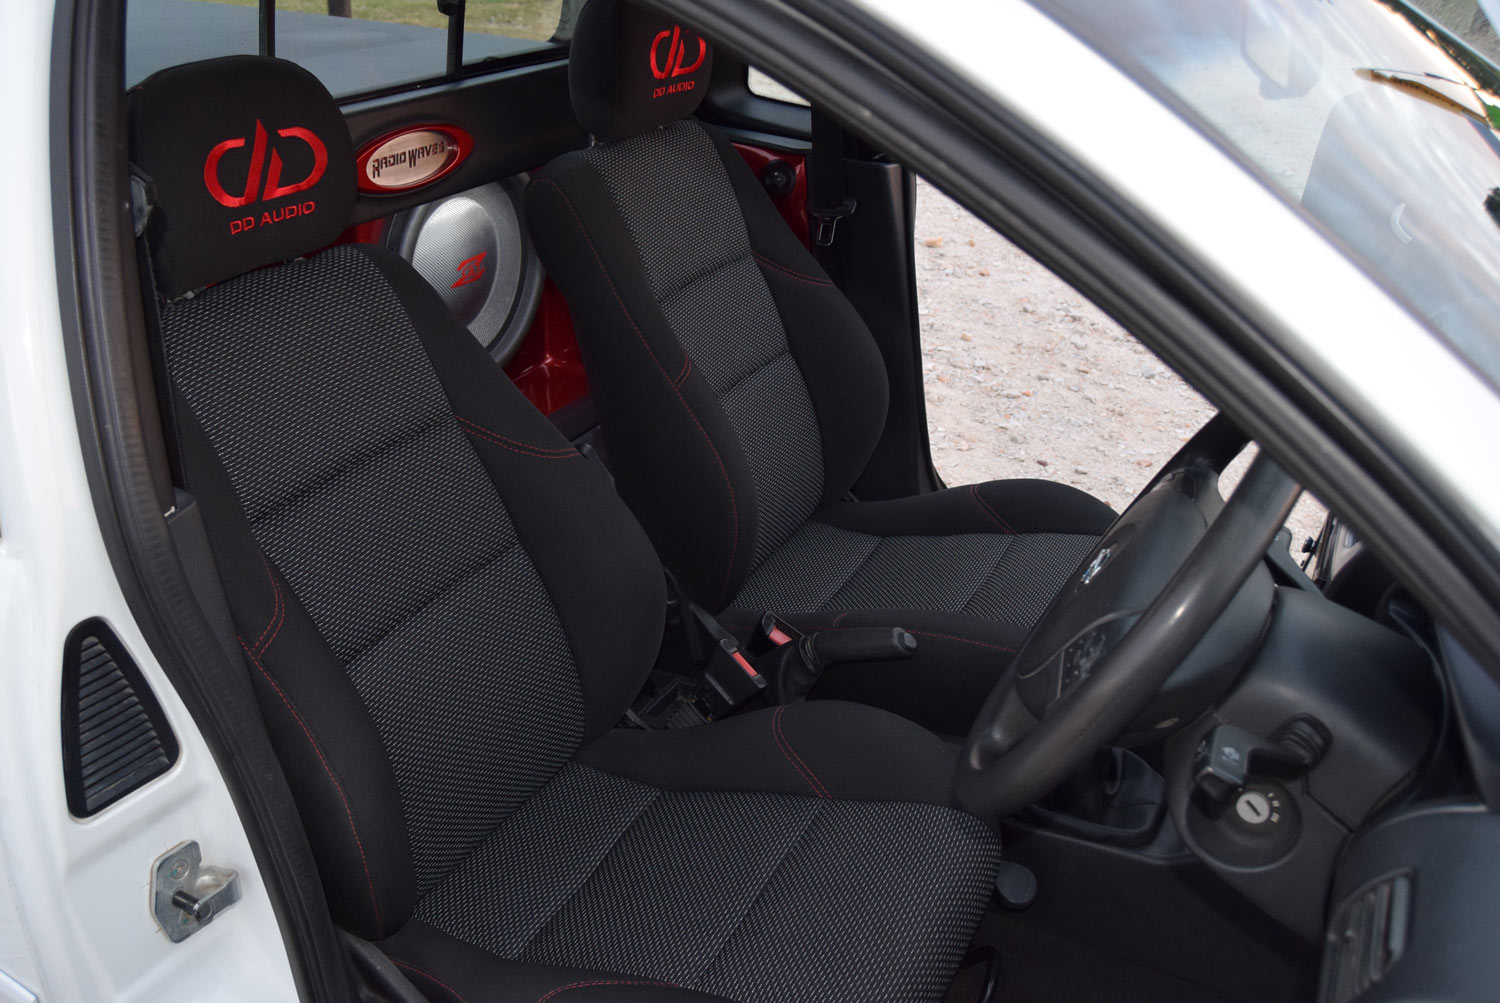 Opel Corsa - Seats with DD Head Rests